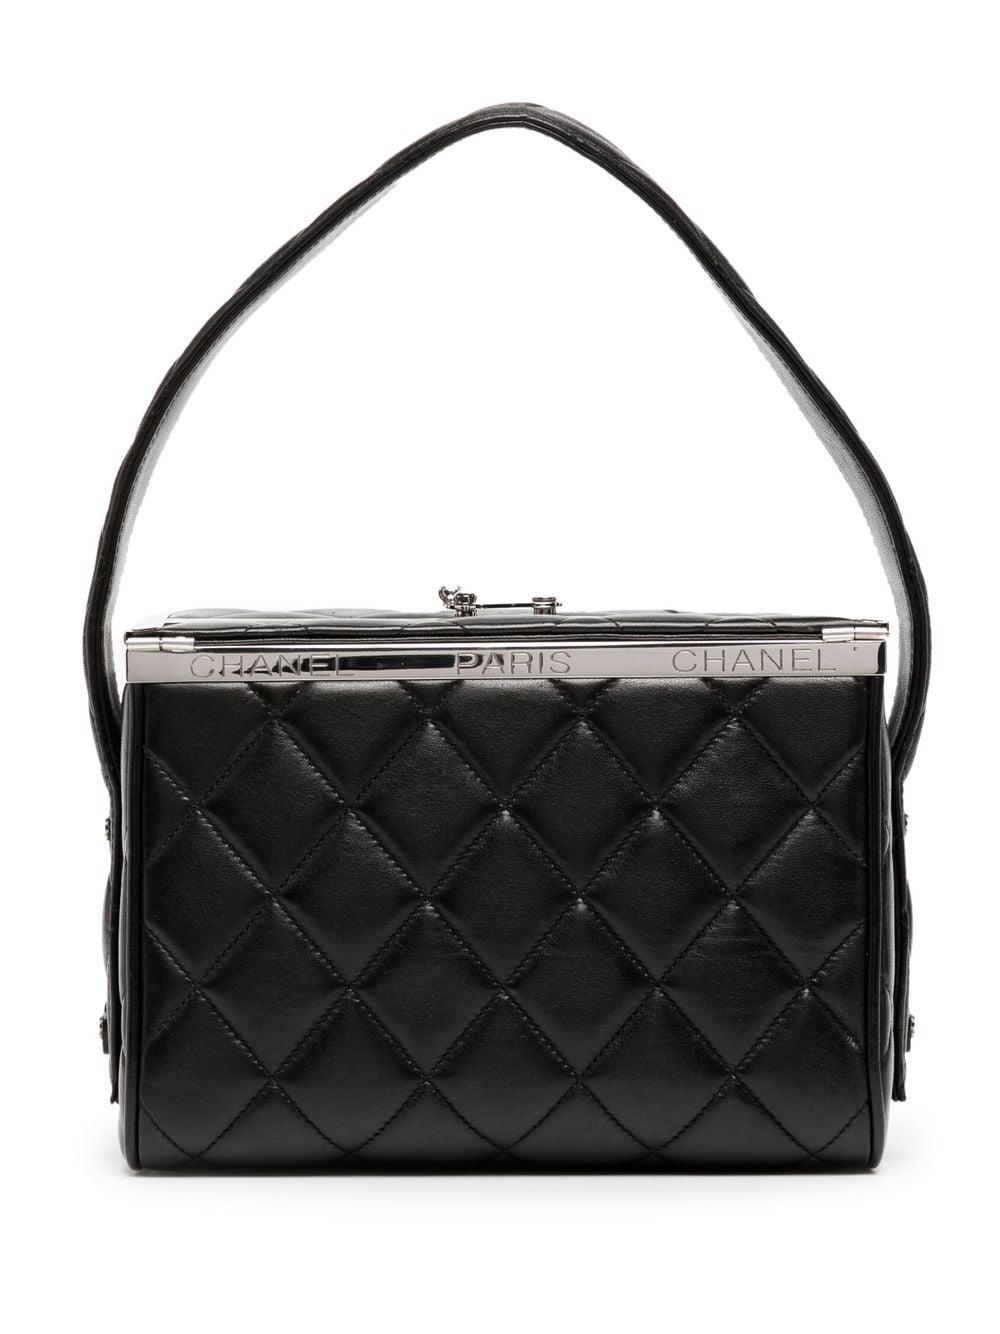 Chanel 1996 Rare Vintage Top Handle Quilted Lambskin Small Vanity Kelly Bag In Good Condition For Sale In Miami, FL